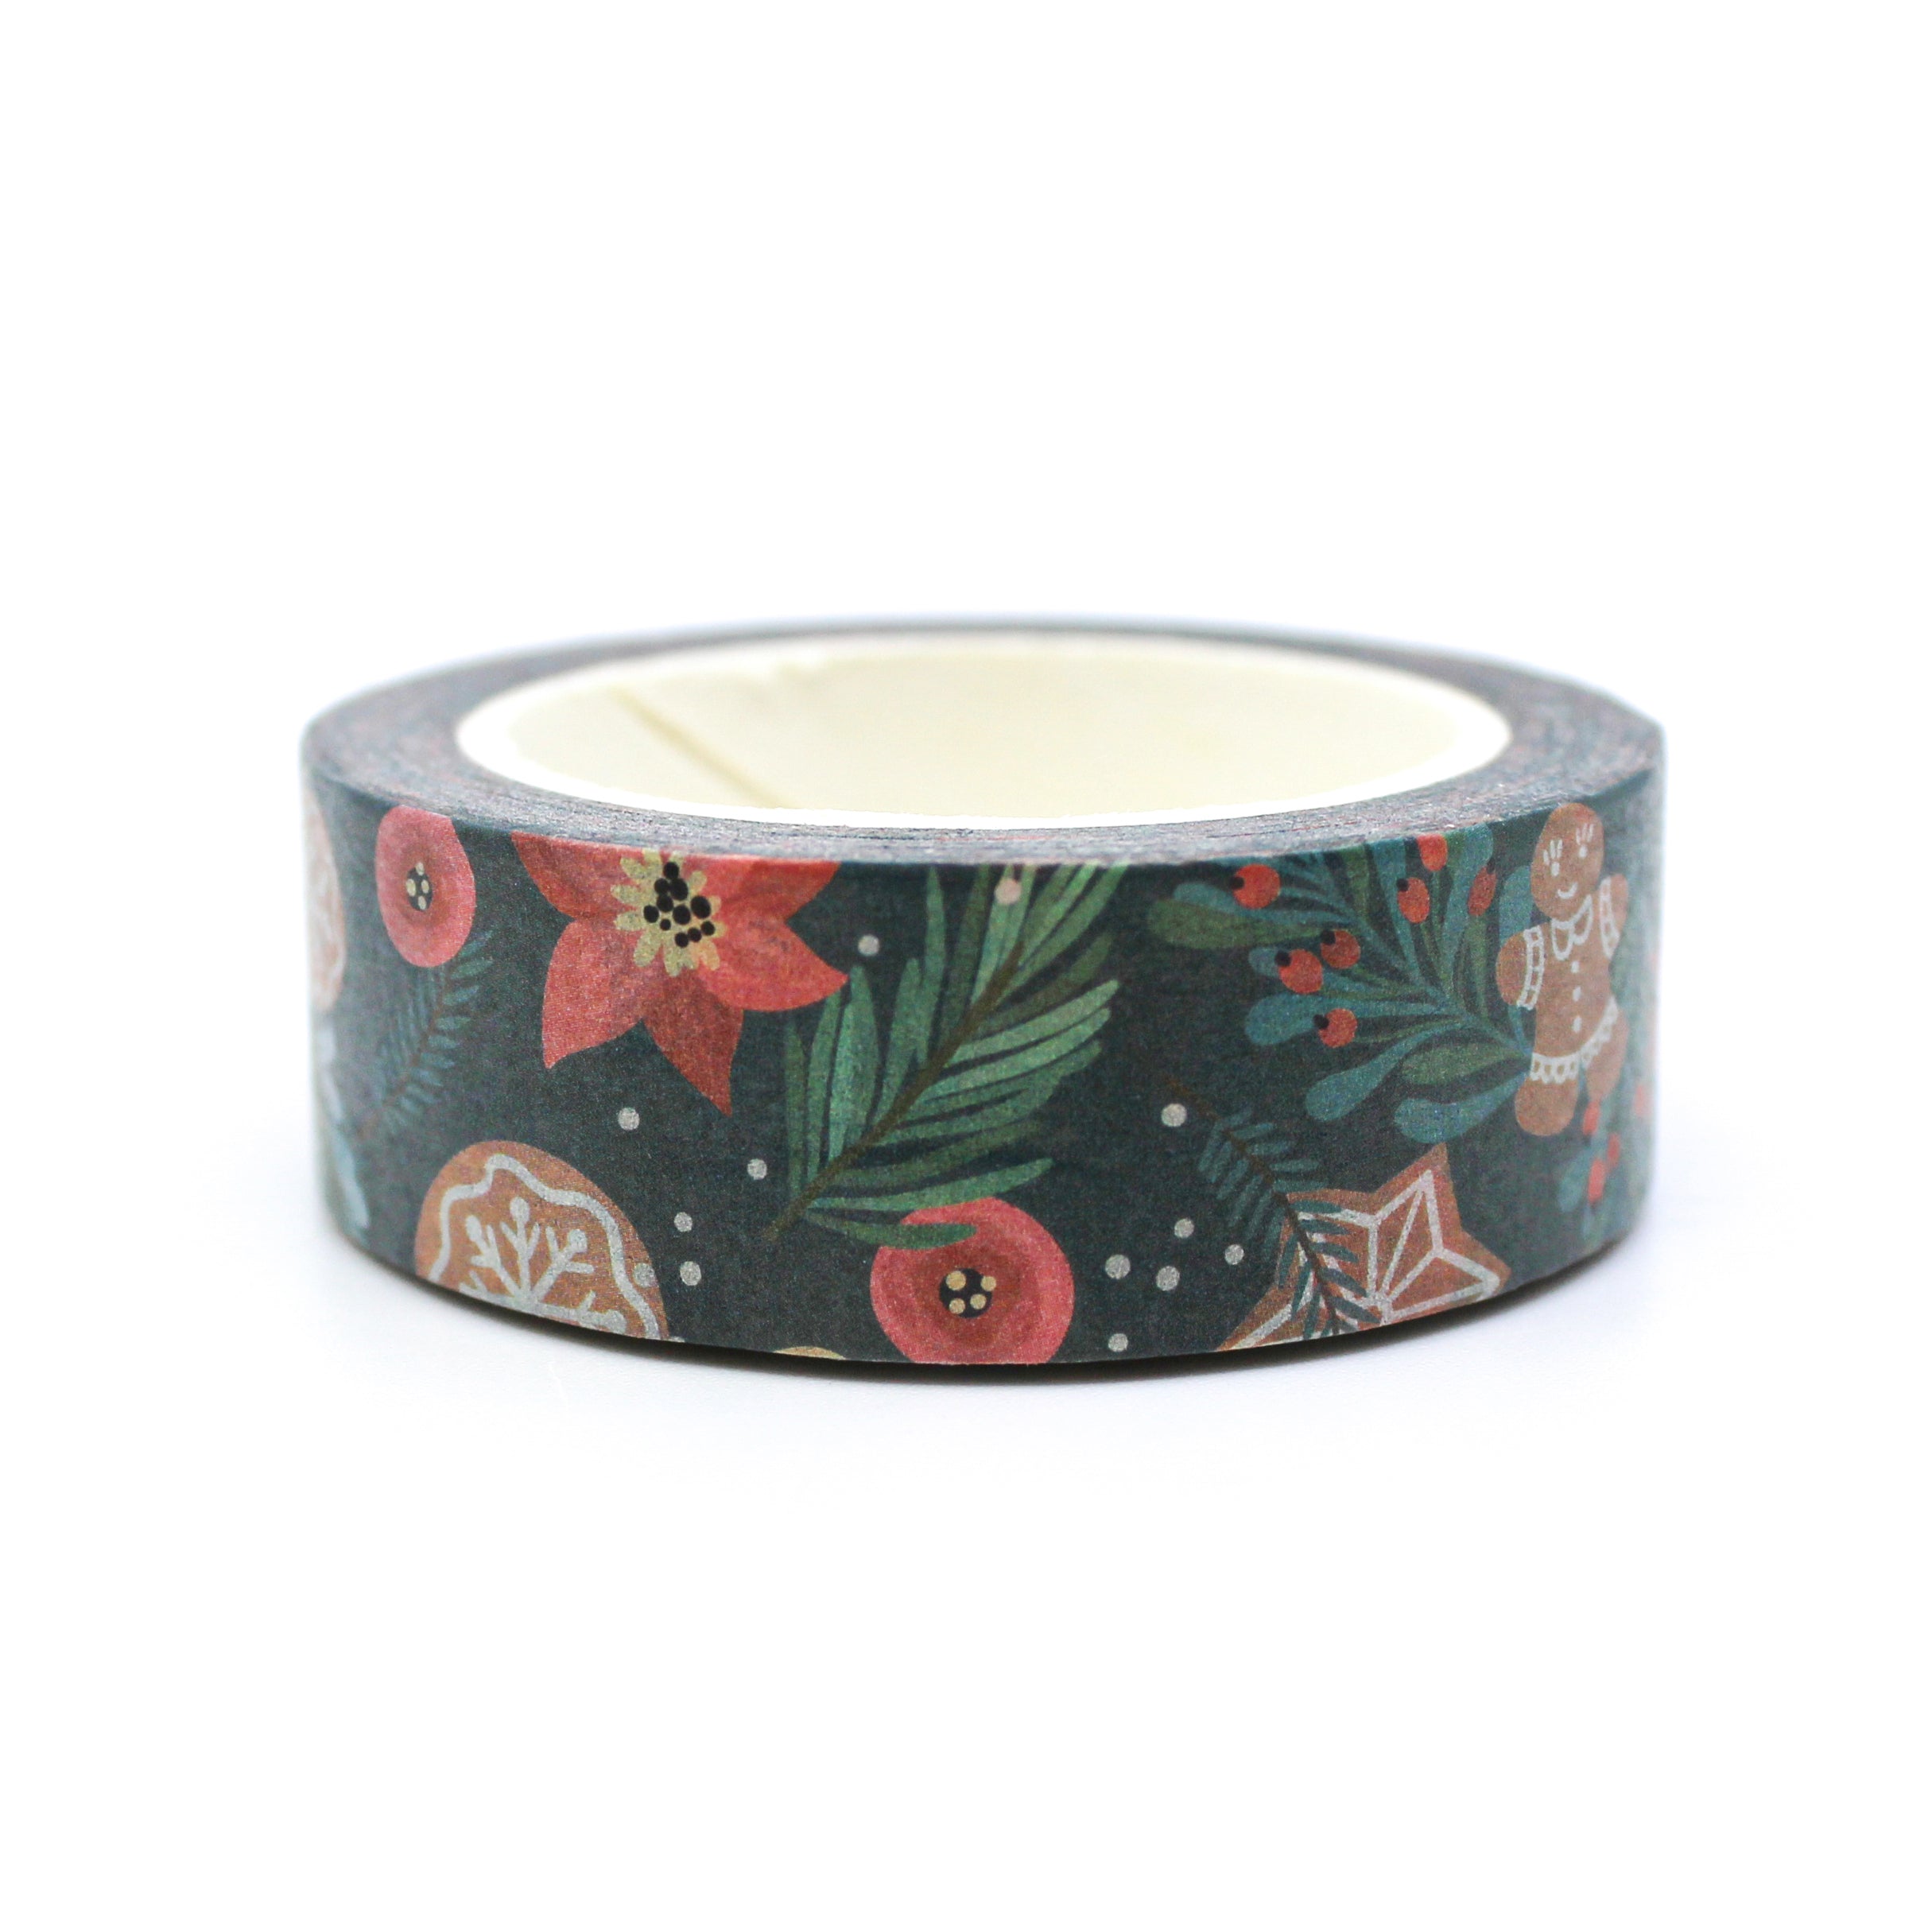 Cute Christmas Cookie and Gingerbread Man Washi Tape which is perfect for decorating homemade holiday goodies you are gifting from BBB Supplies Craft Shop.